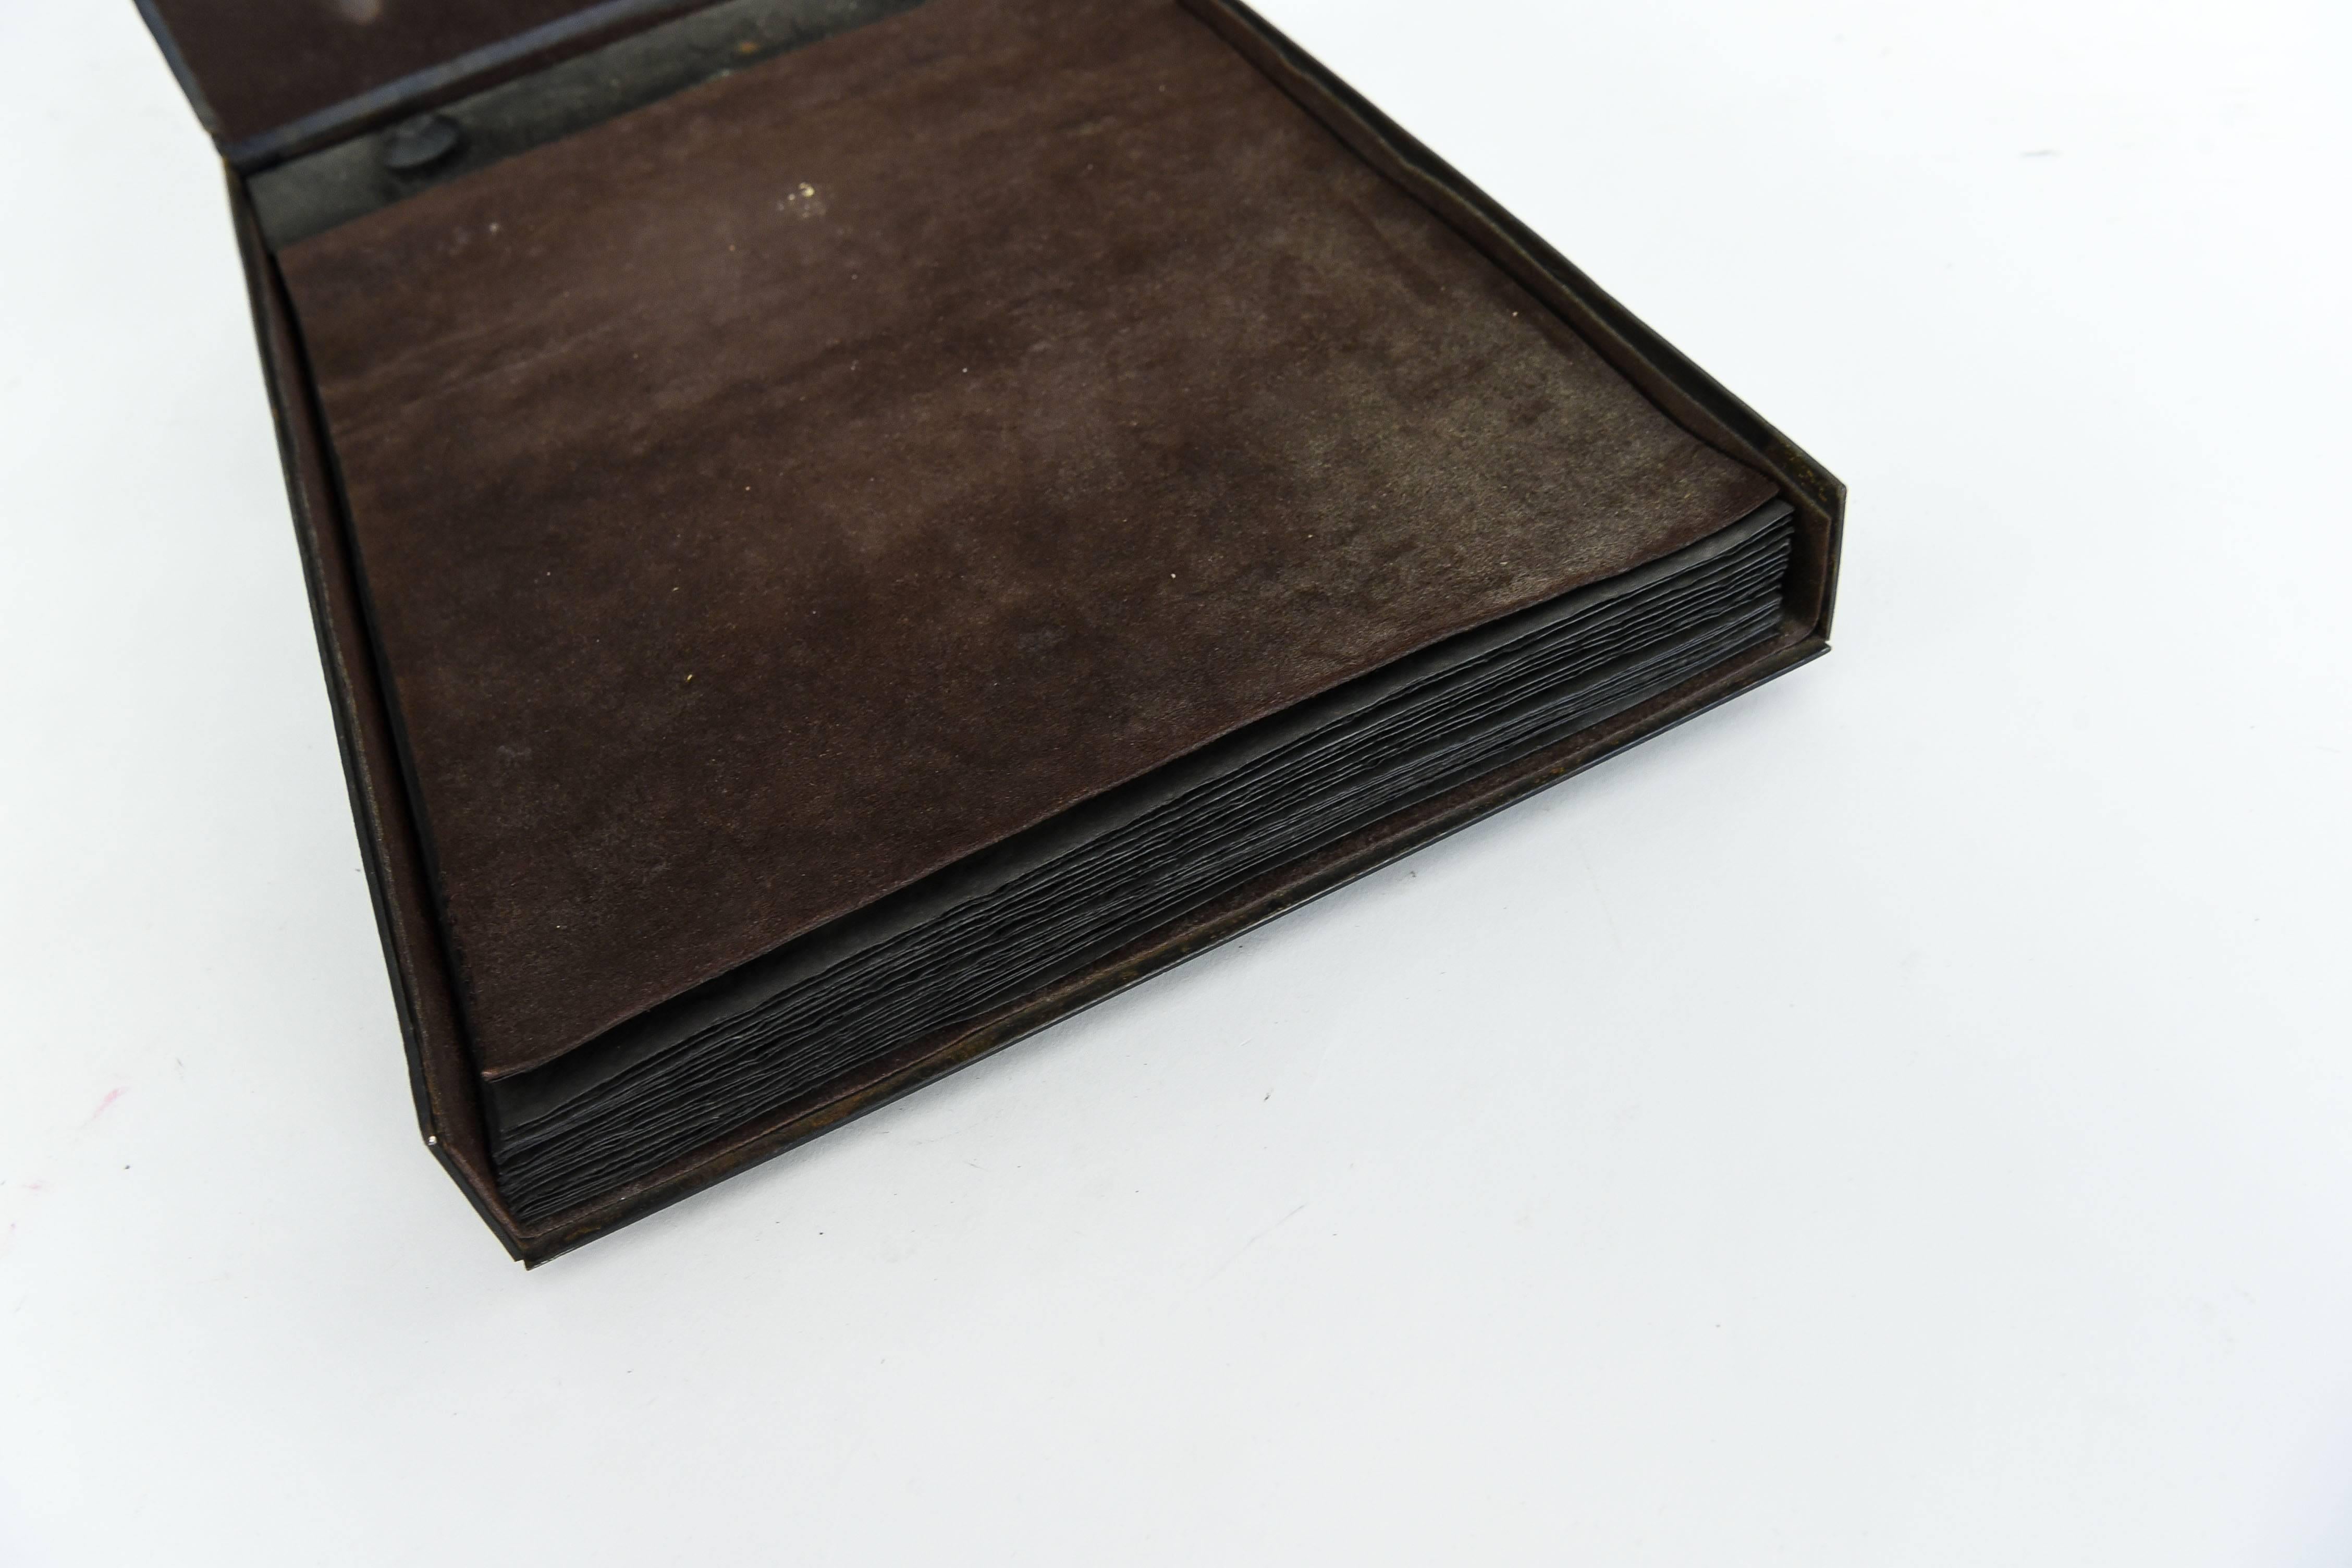 Czechoslovakian Hammered Copper and Steel Photo Album 2